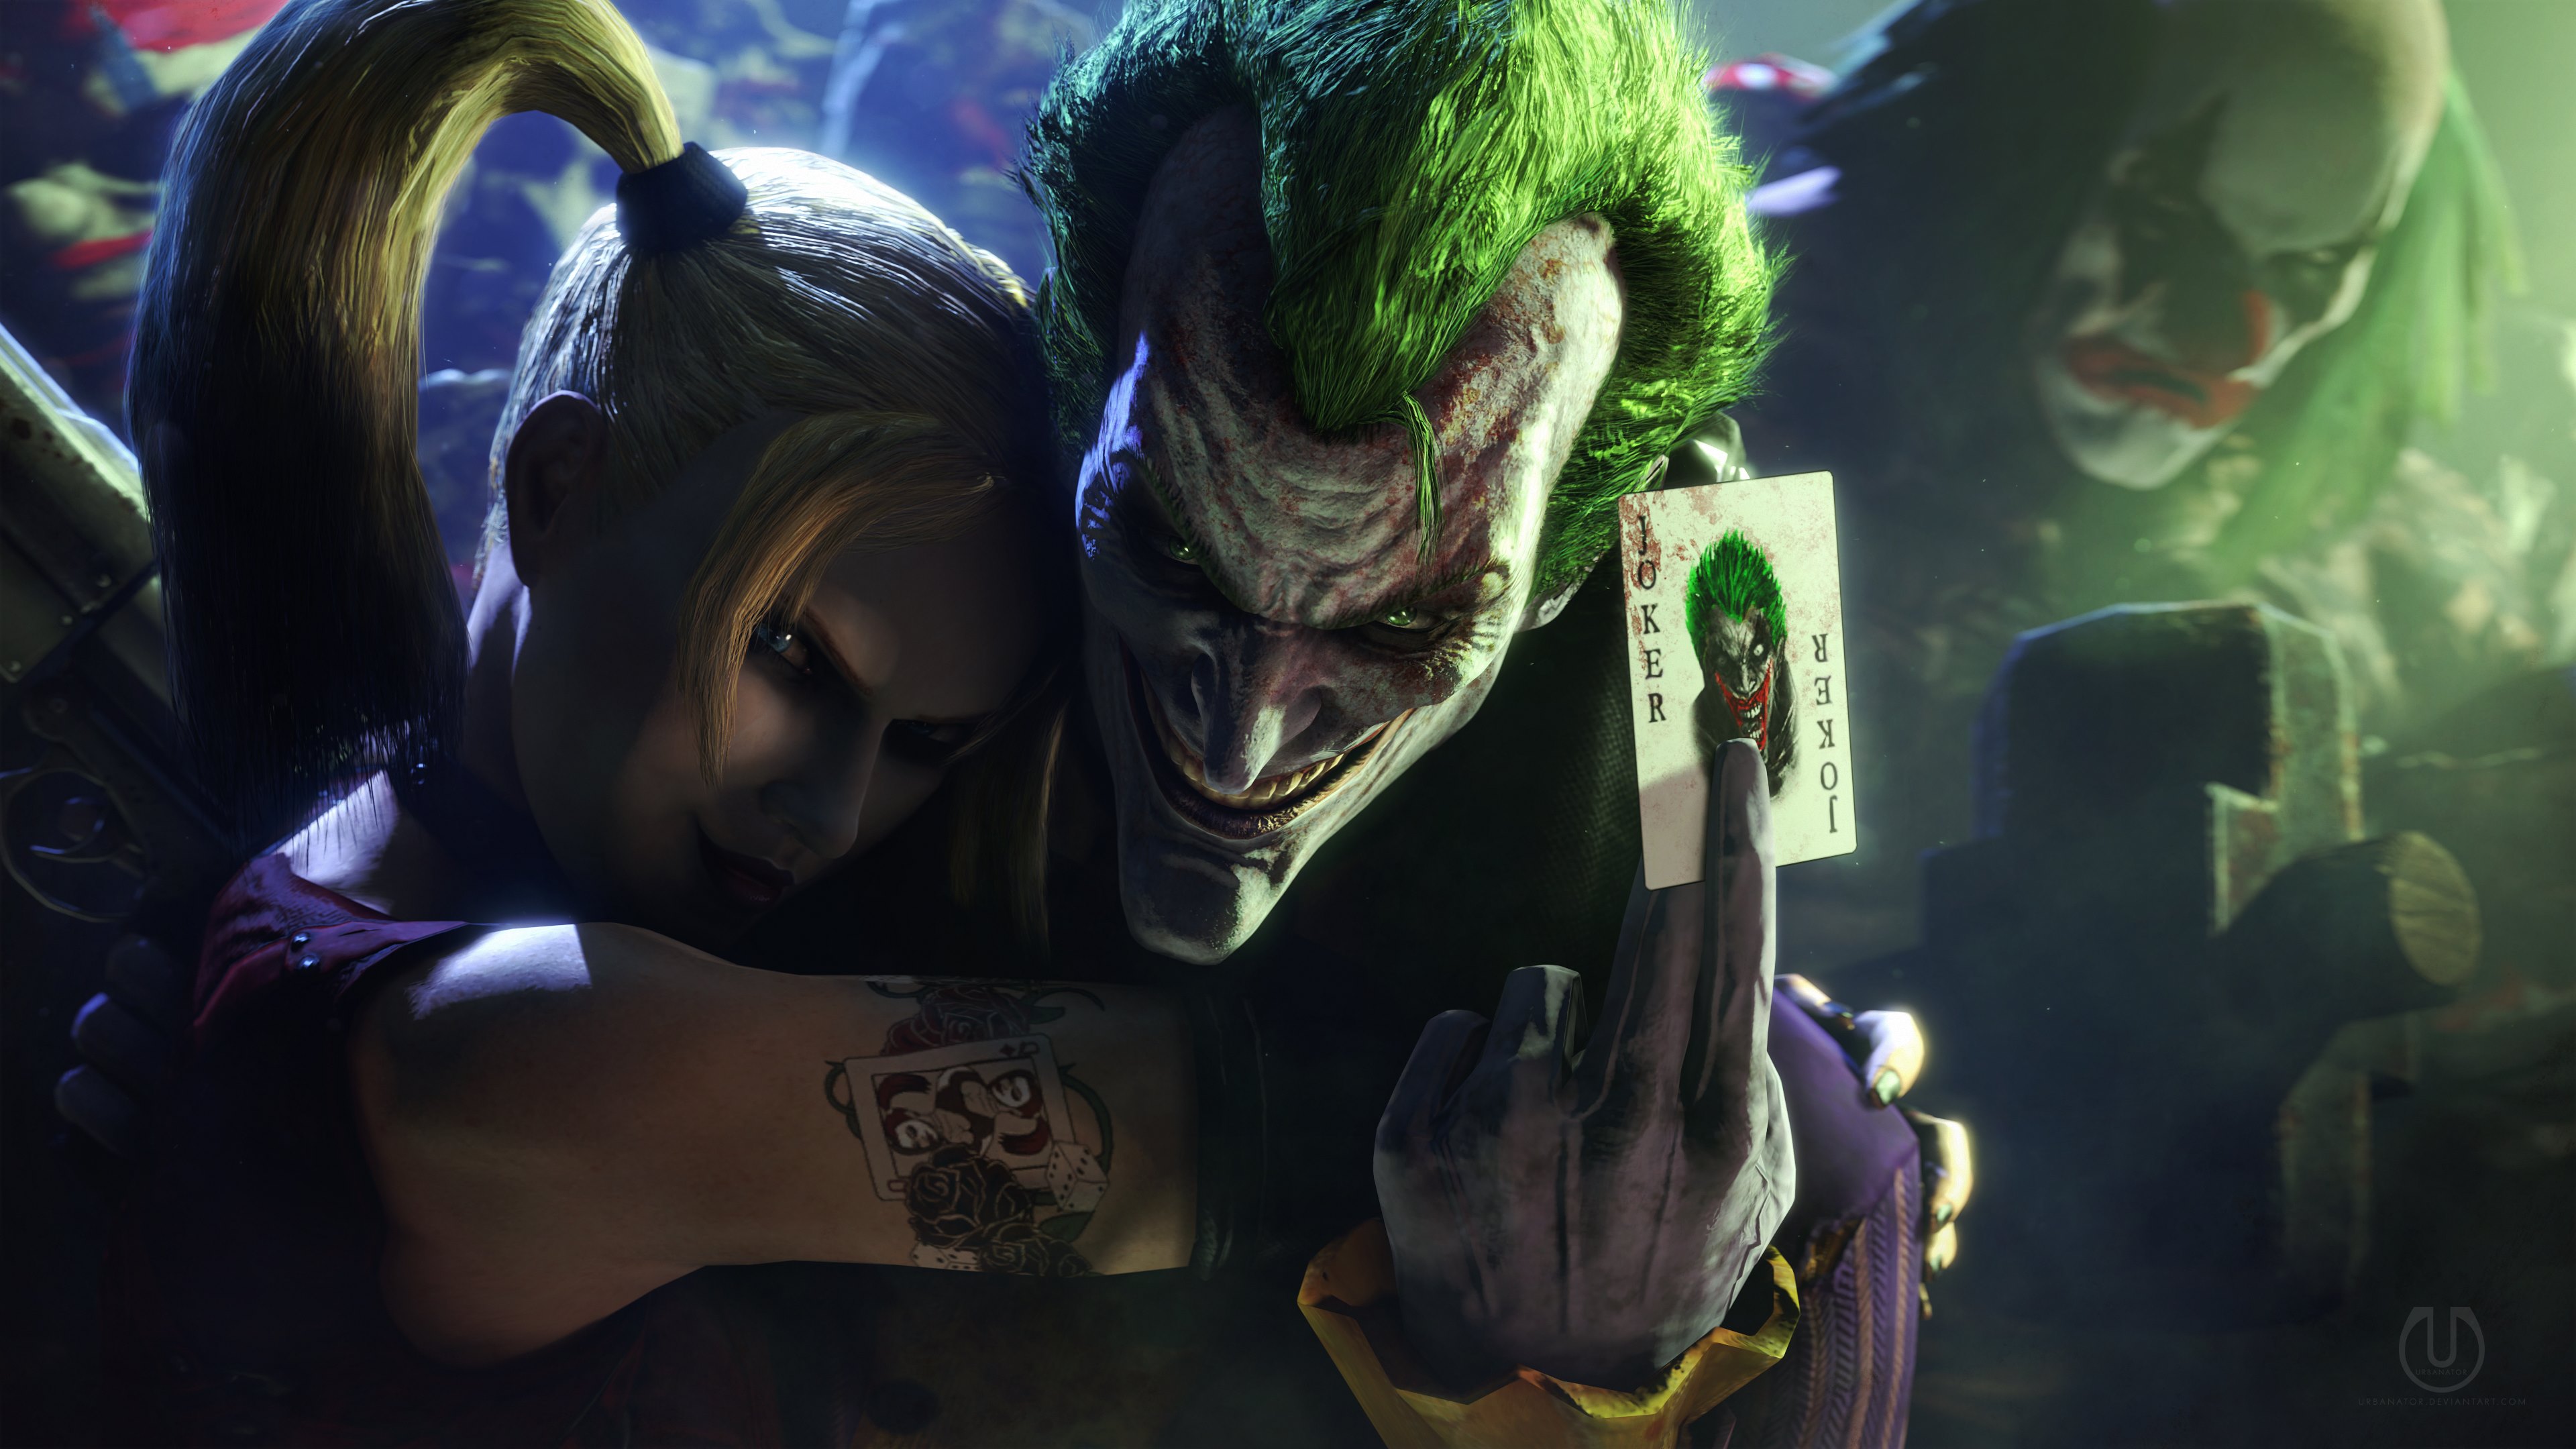 Joker and Harley Quinn Wallpapers HD Wallpapers 3840x2160